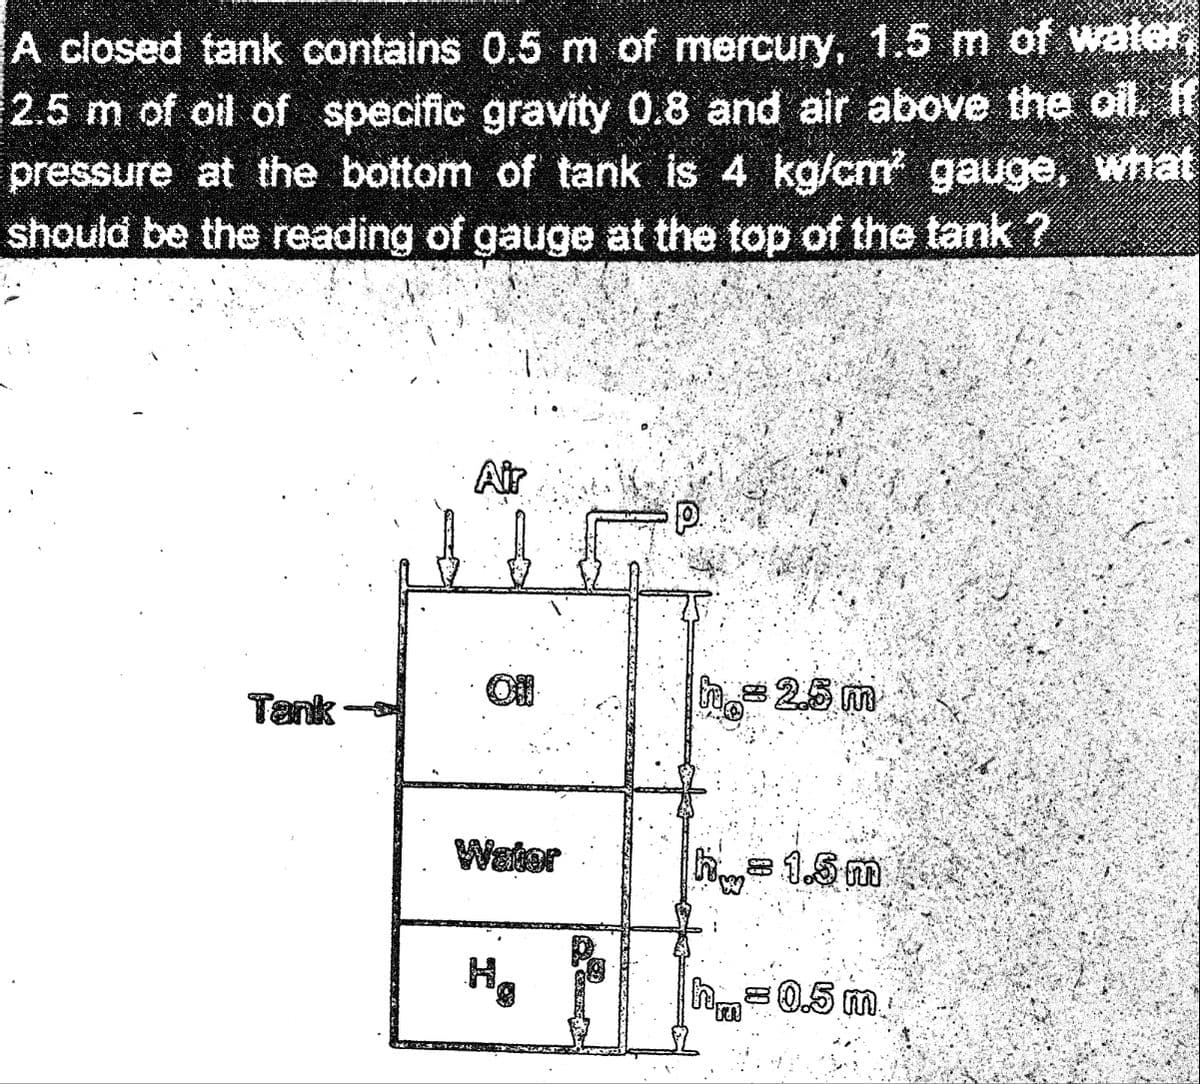 A closed tank contains 0.5 m of mercury, 1.5 m of water,
2.5 m of oil of specific gravity 0.8 and air above the oil. If
pressure at the bottom of tank is 4 kg/cm gauge, what
should be the reading of gauge at the top of the tank ?
Air
Tank
h25 m
Water
1.5m
0.5 m.
